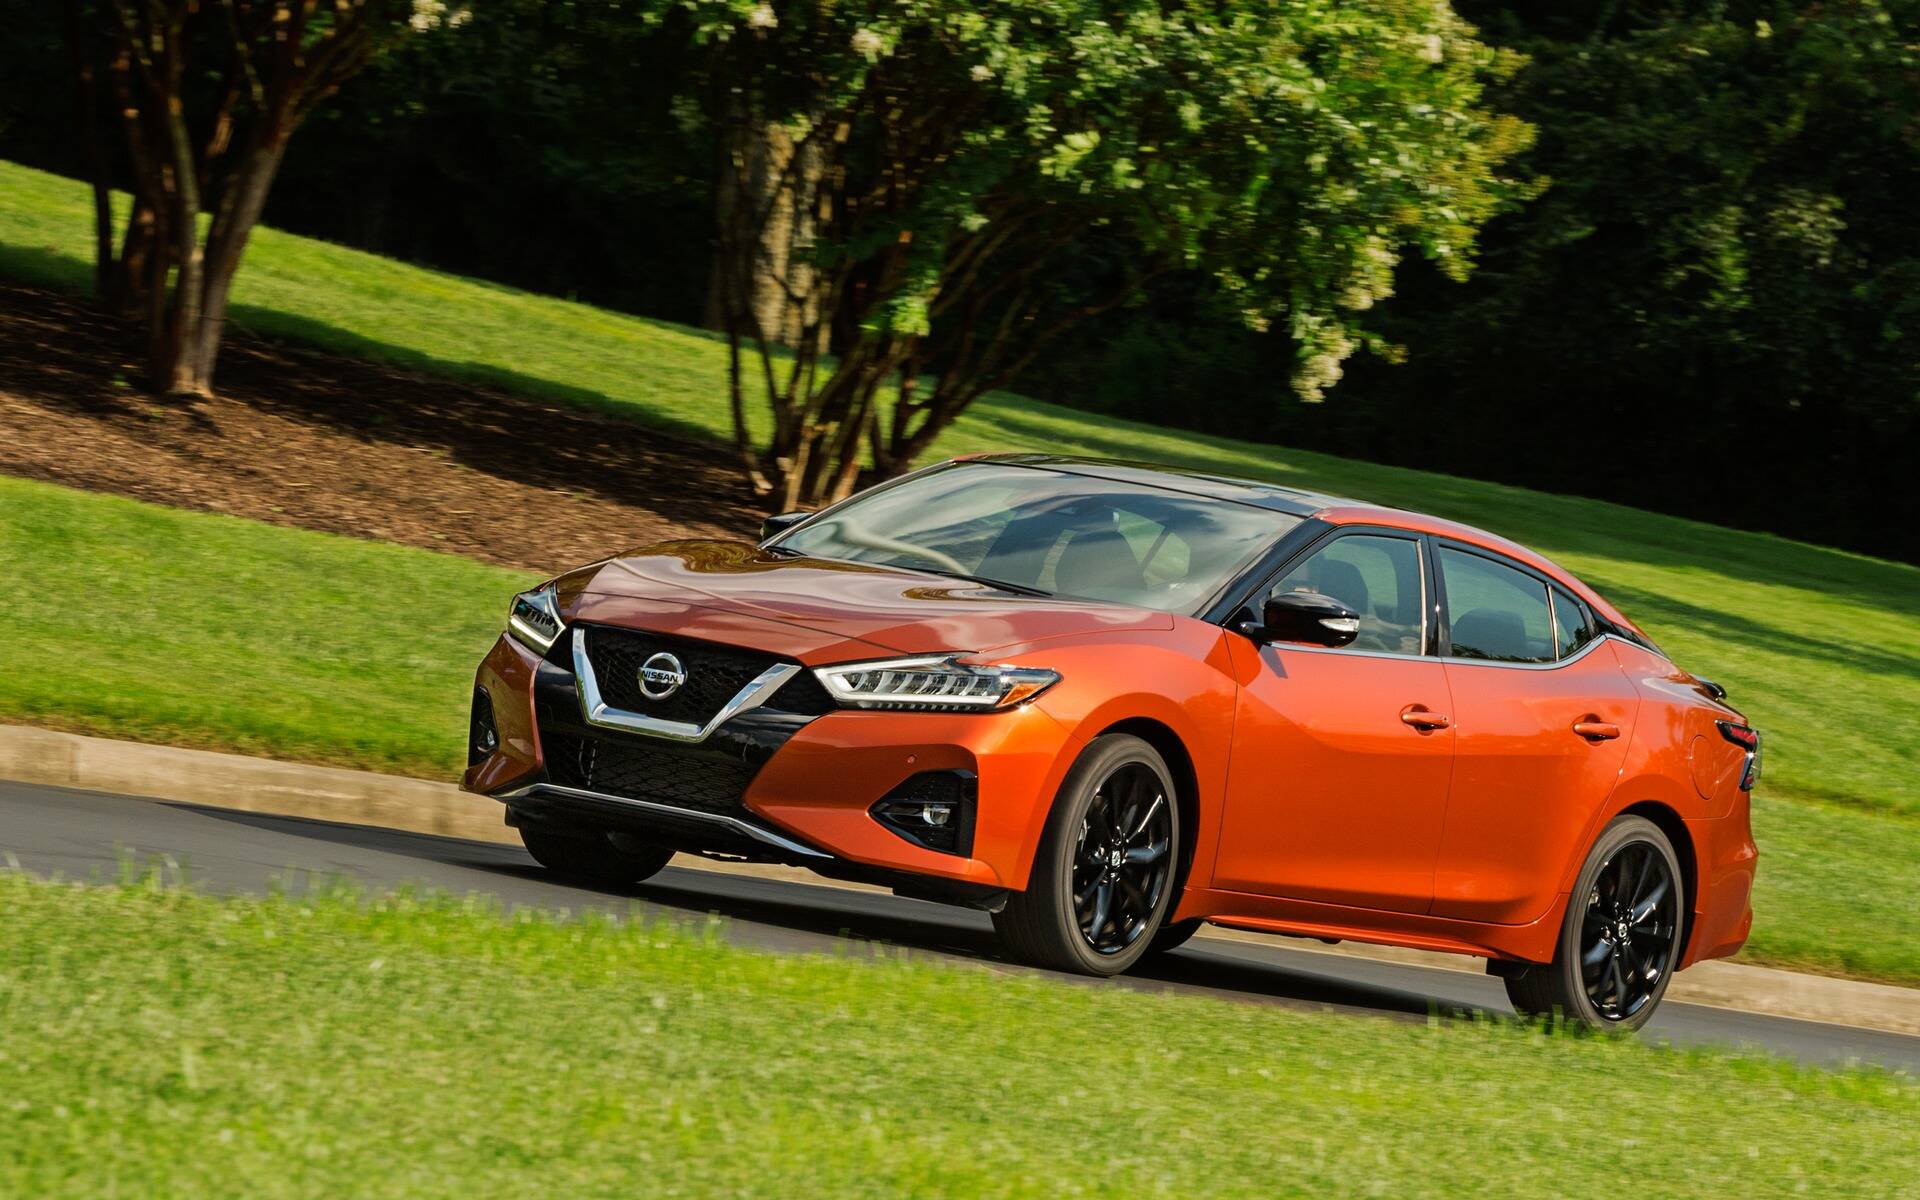 Nissan Saying Goodbye to Maxima, but Signs Point to a Relaunch Soon